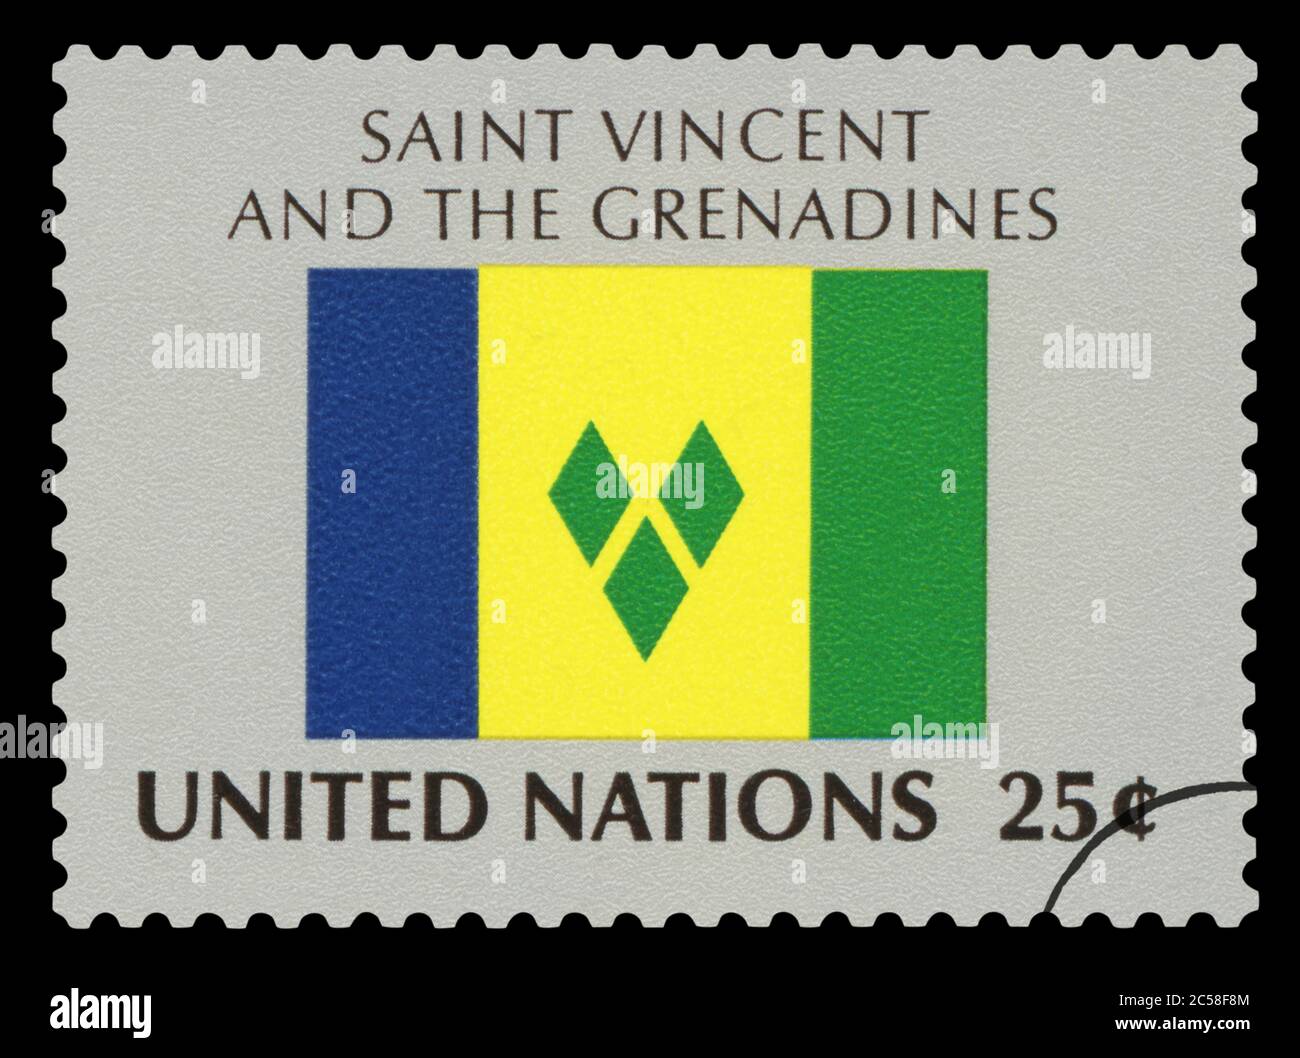 Saint Vincent and the Grenadines- Postage Stamp of national flag, Series of United Nations, circa 1984. Stock Photo